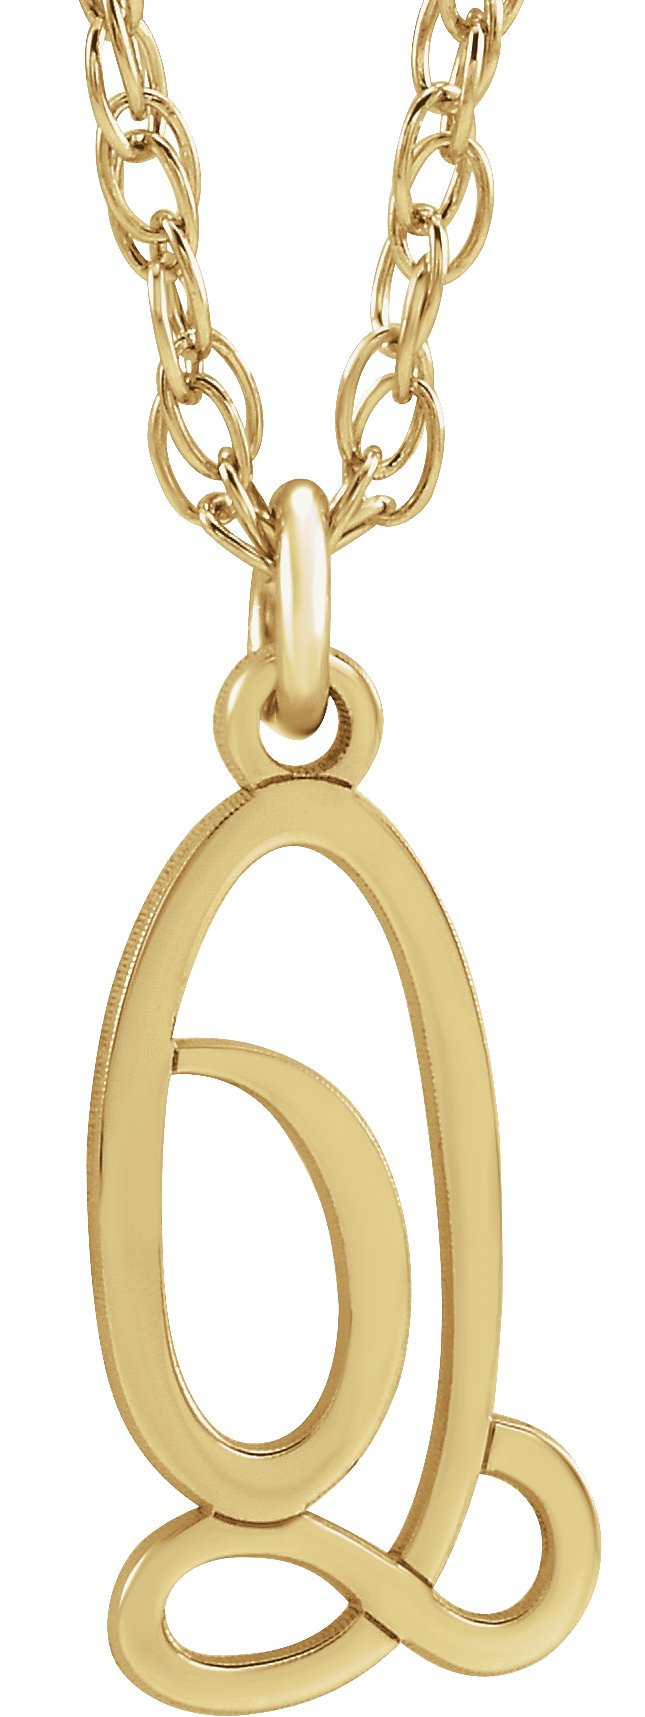 14K Yellow Gold-Plated Sterling Silver Script Initial Q 16-18" Necklace